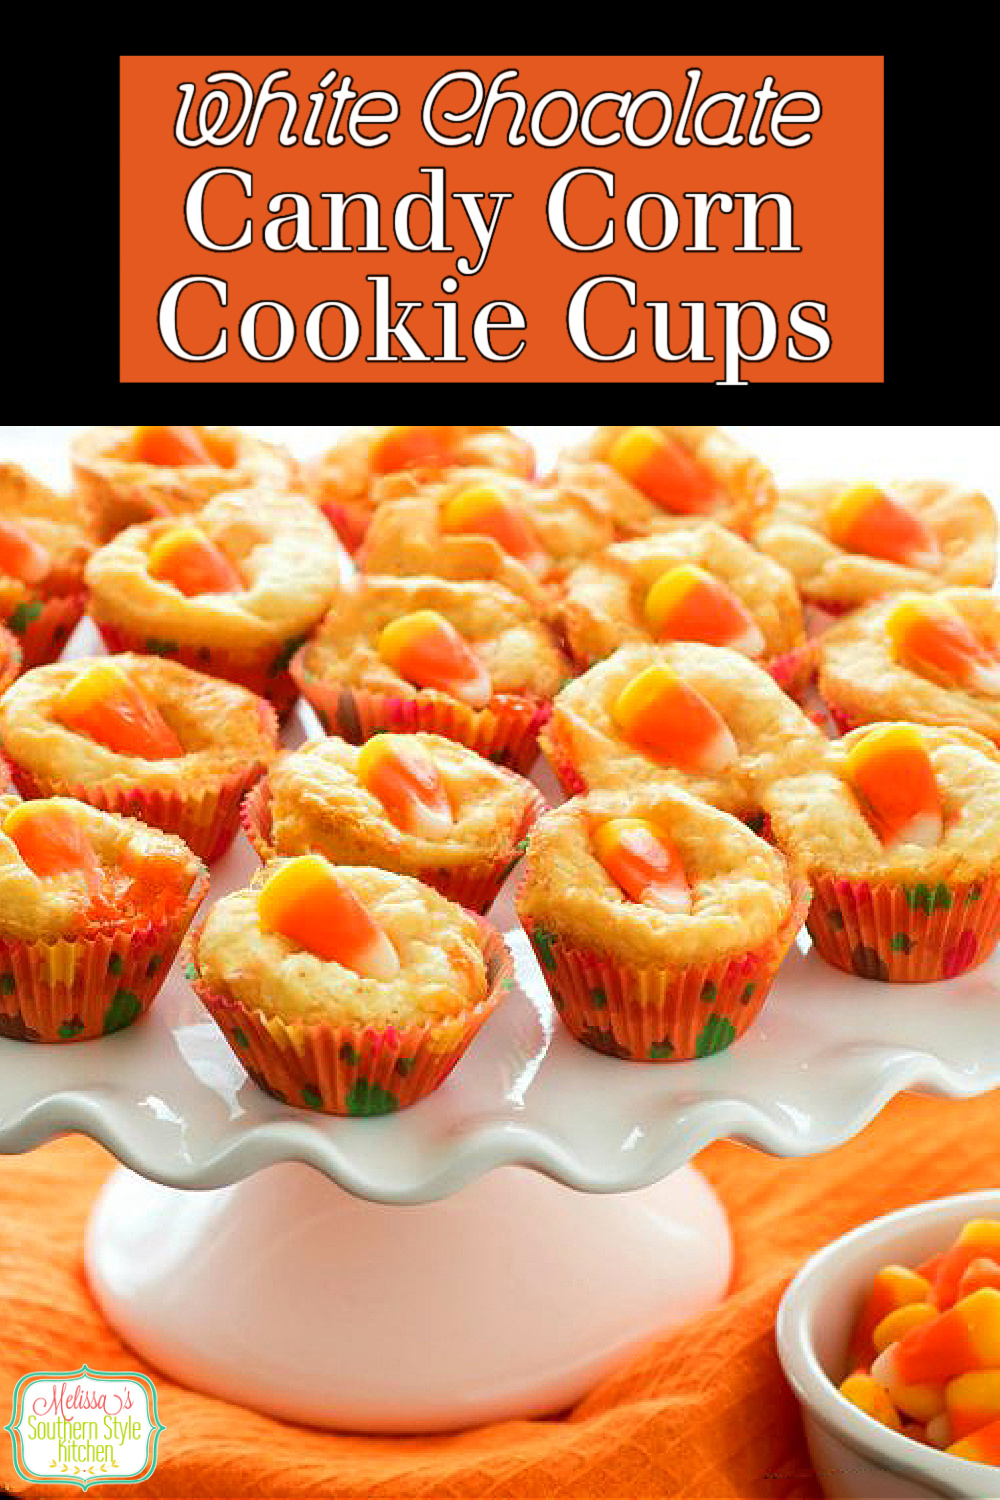 These seasonal two-bite cookie cups are a fun way to celebrate the flavors synonymous with fall #cookiecups #candycorncookies #candycorncookiecups #whitechocolatecookiecups #fallbaking #halloweeencookies #cookies #desserts #dessertfoodrecipes #southernfood #southernrecipes